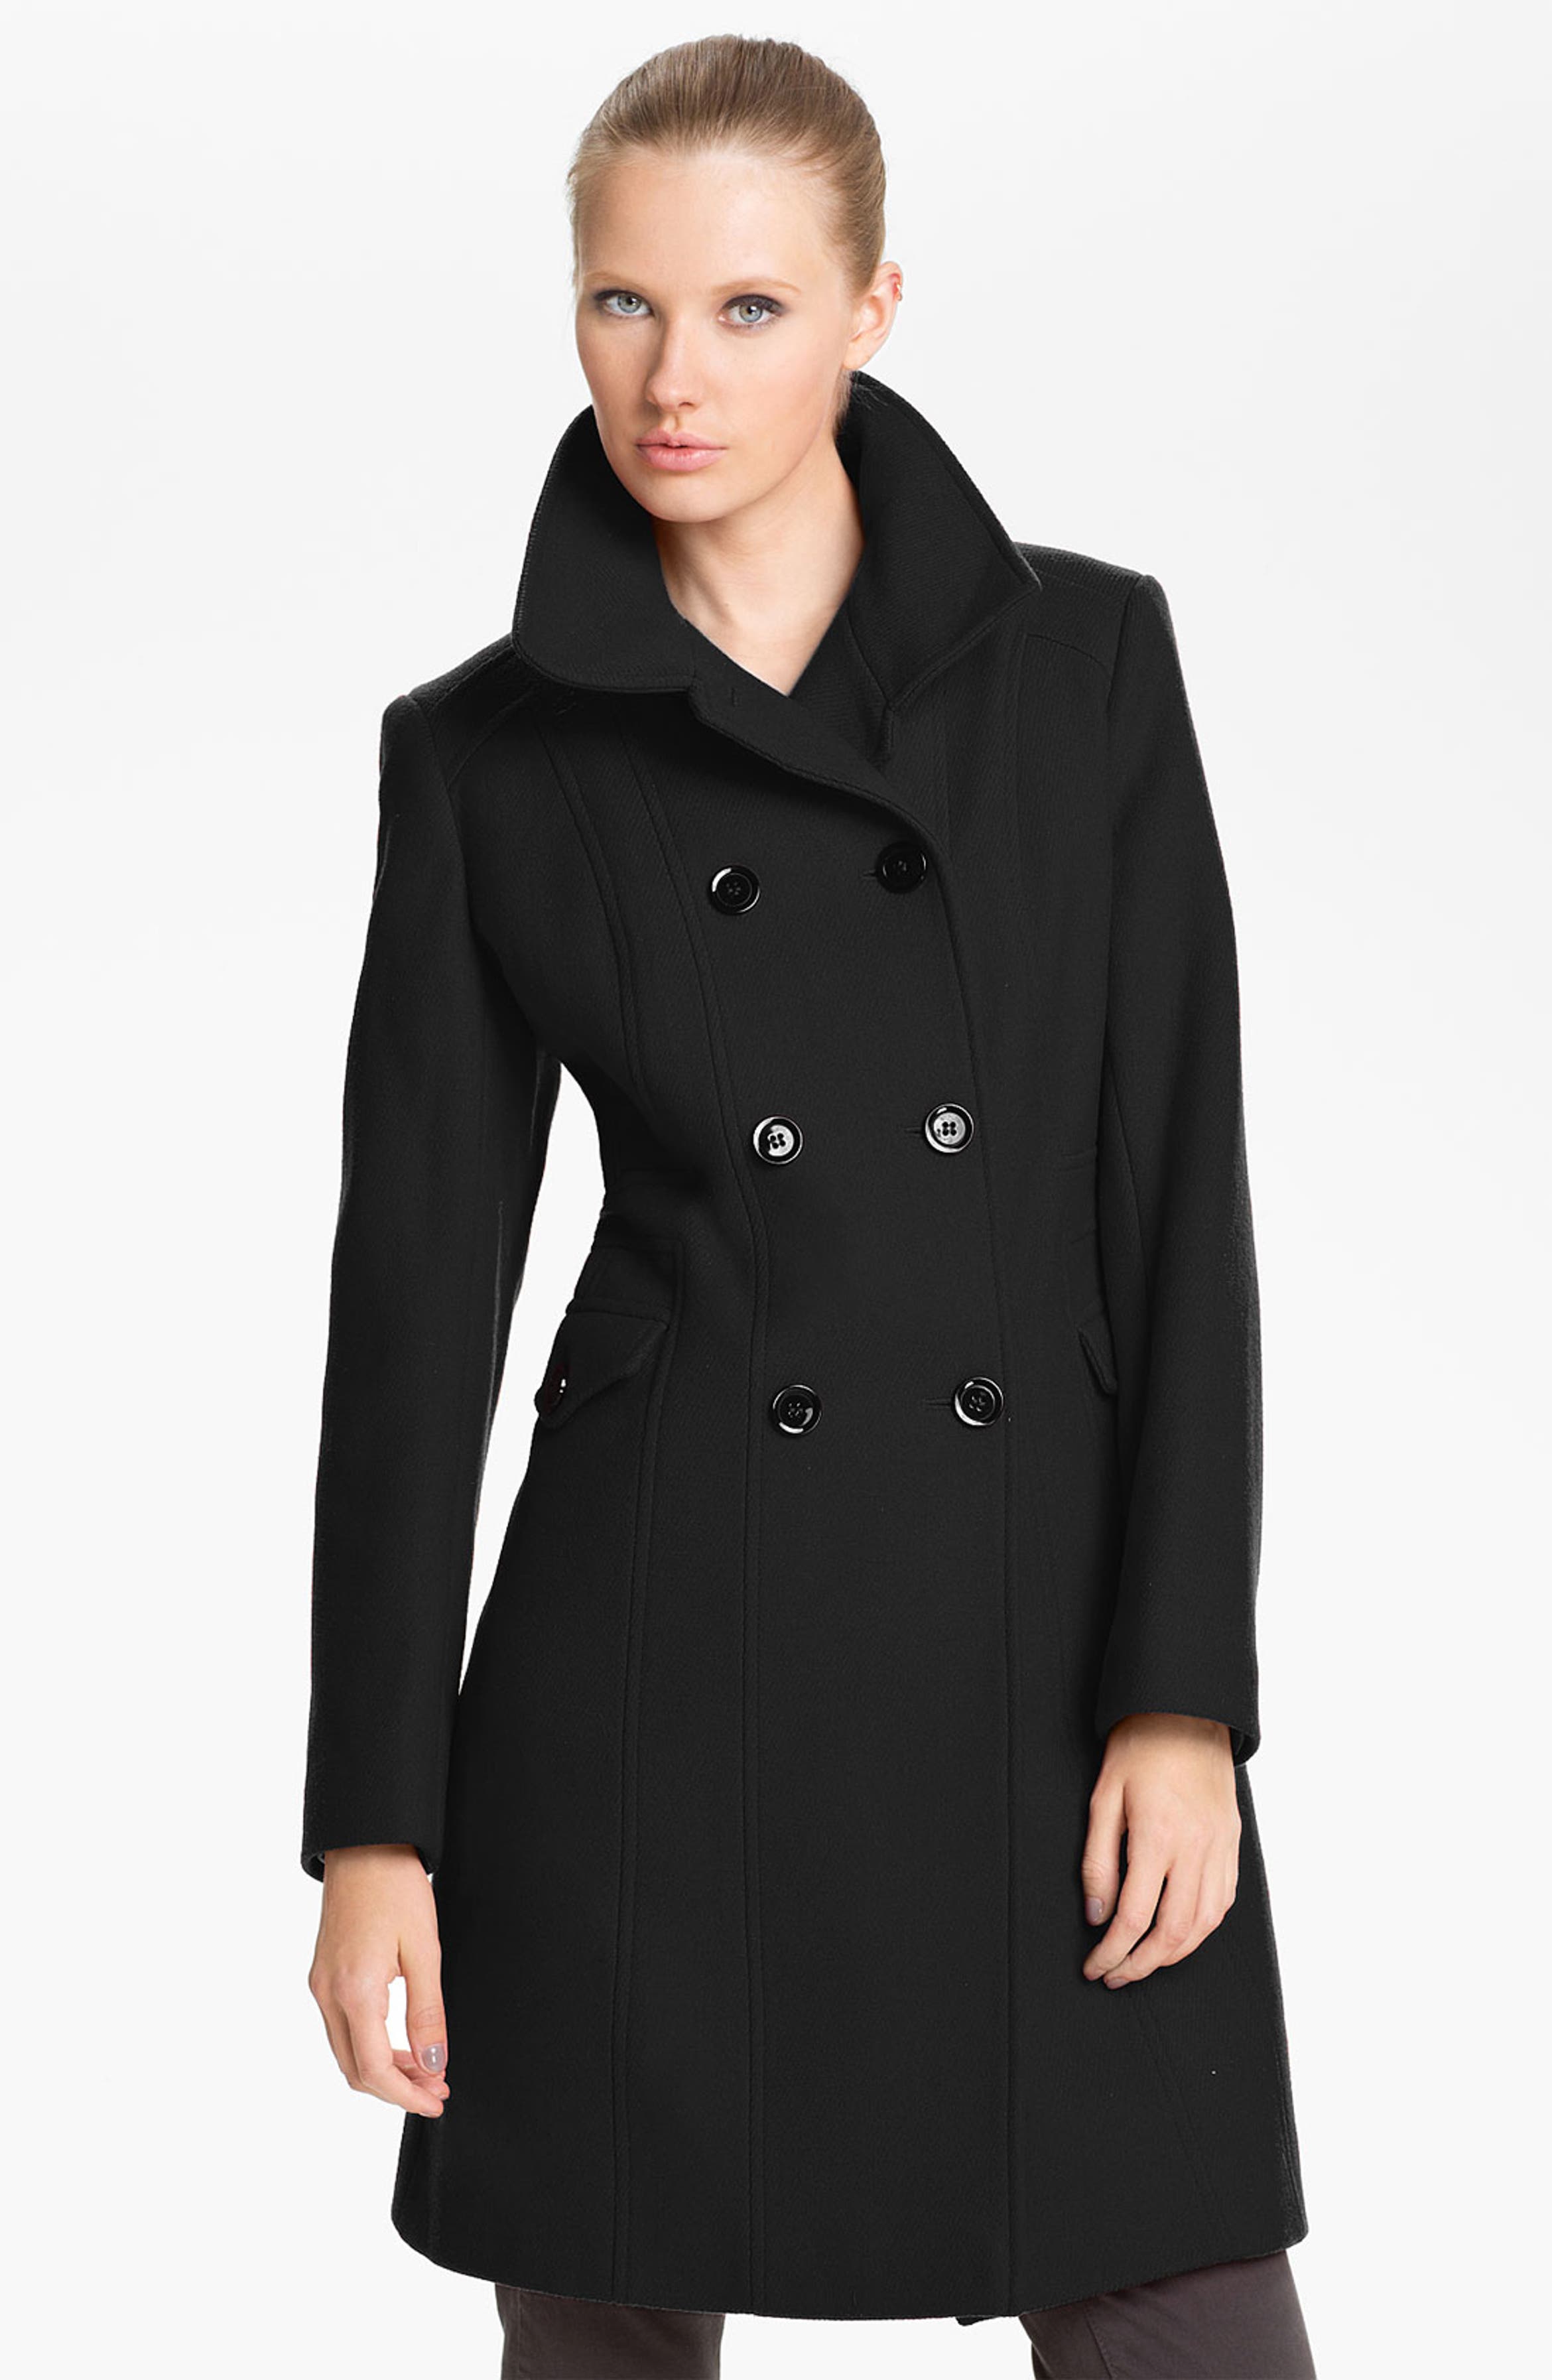 Nicole Miller Double Breasted Wool Blend Coat | Nordstrom